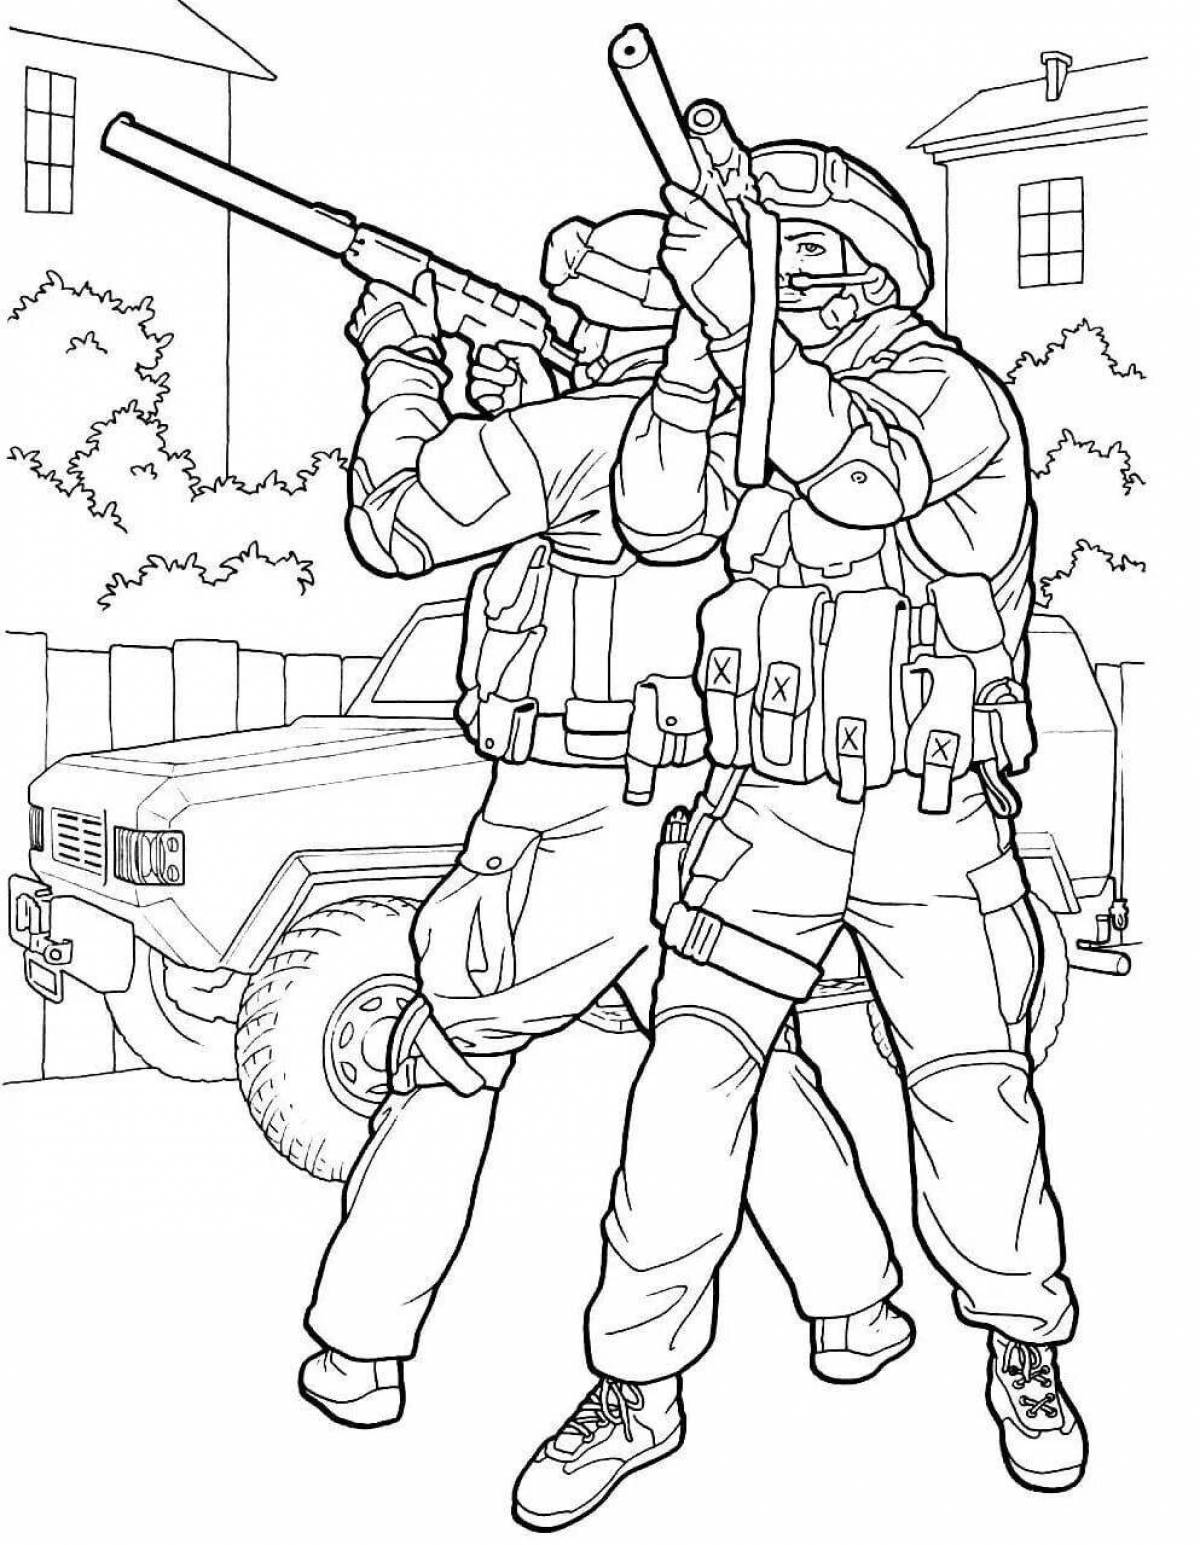 Coloring page fascinating Russian special forces